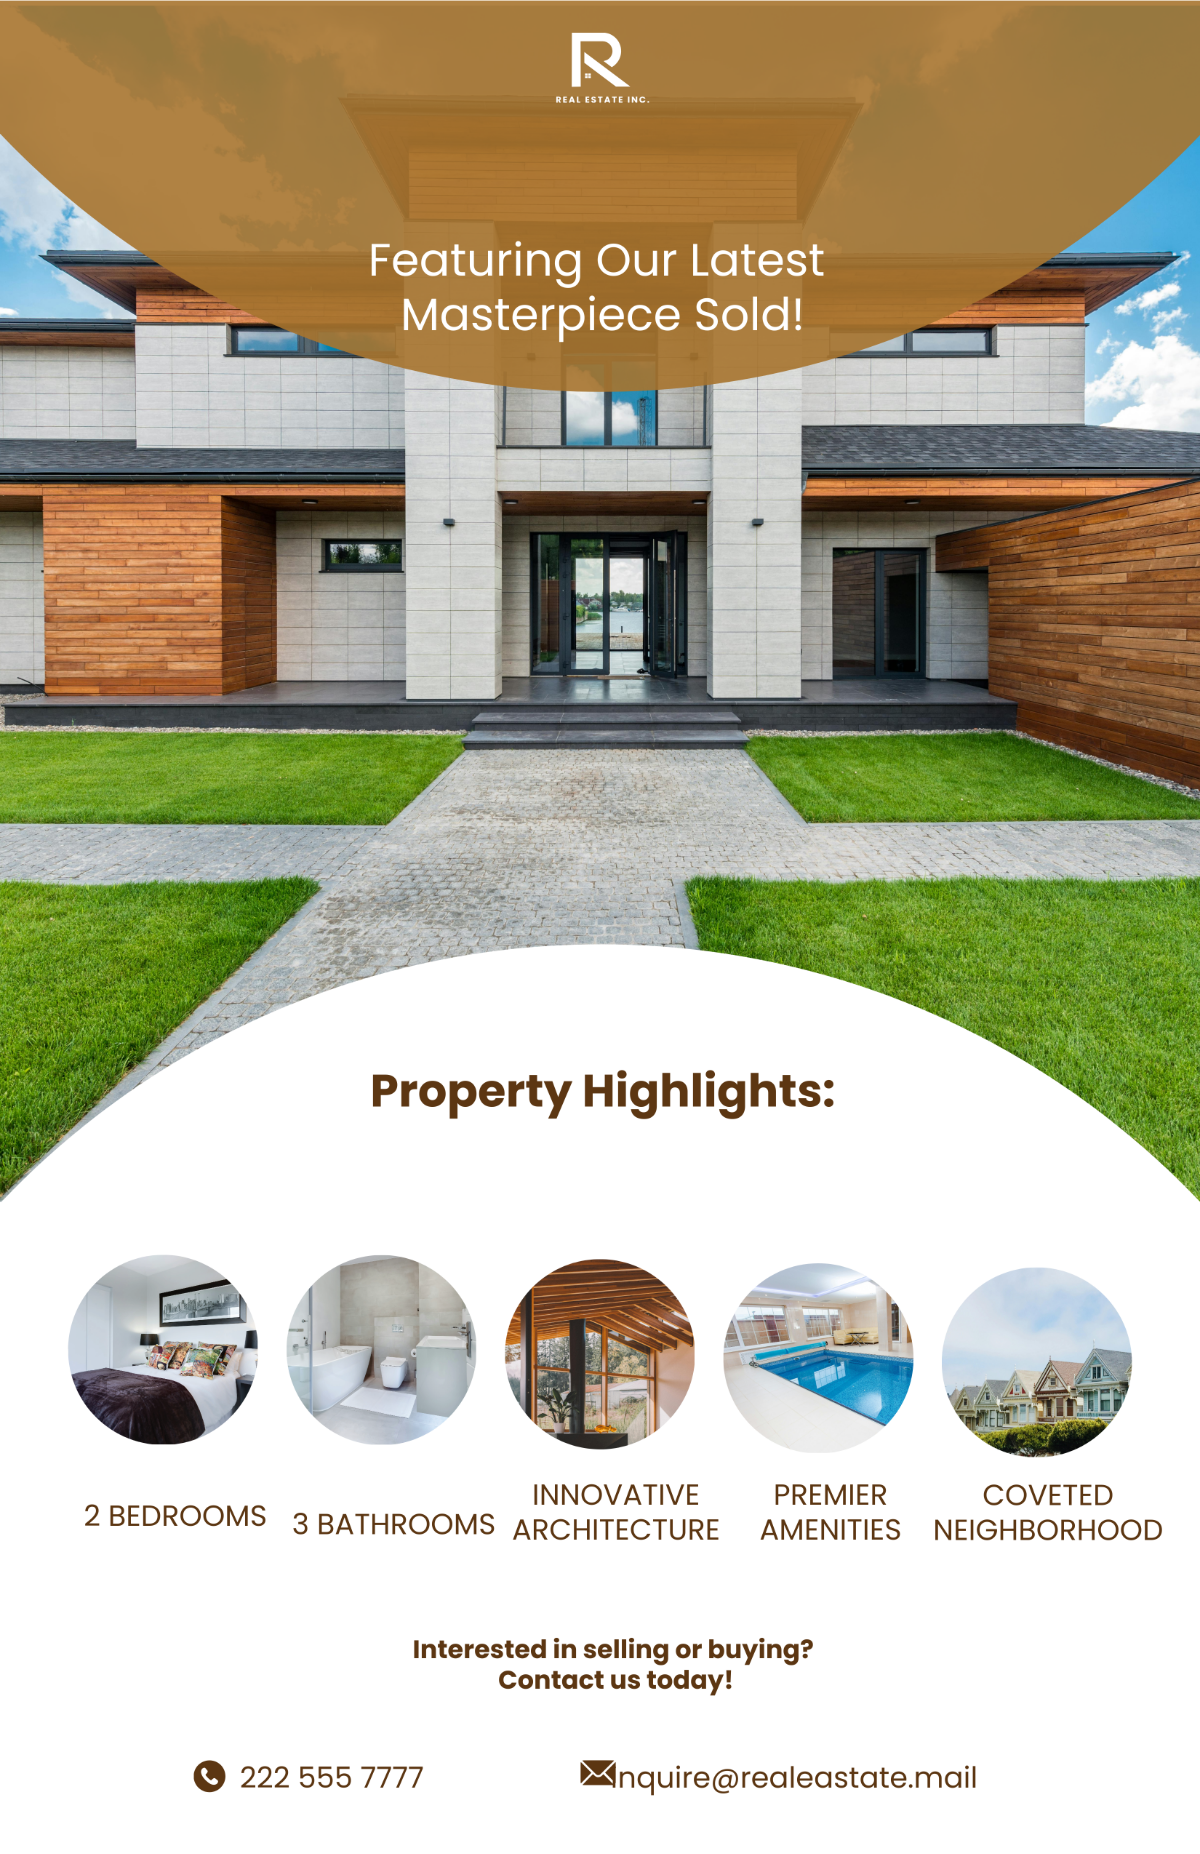 Recently Sold Property Showcase Poster Template